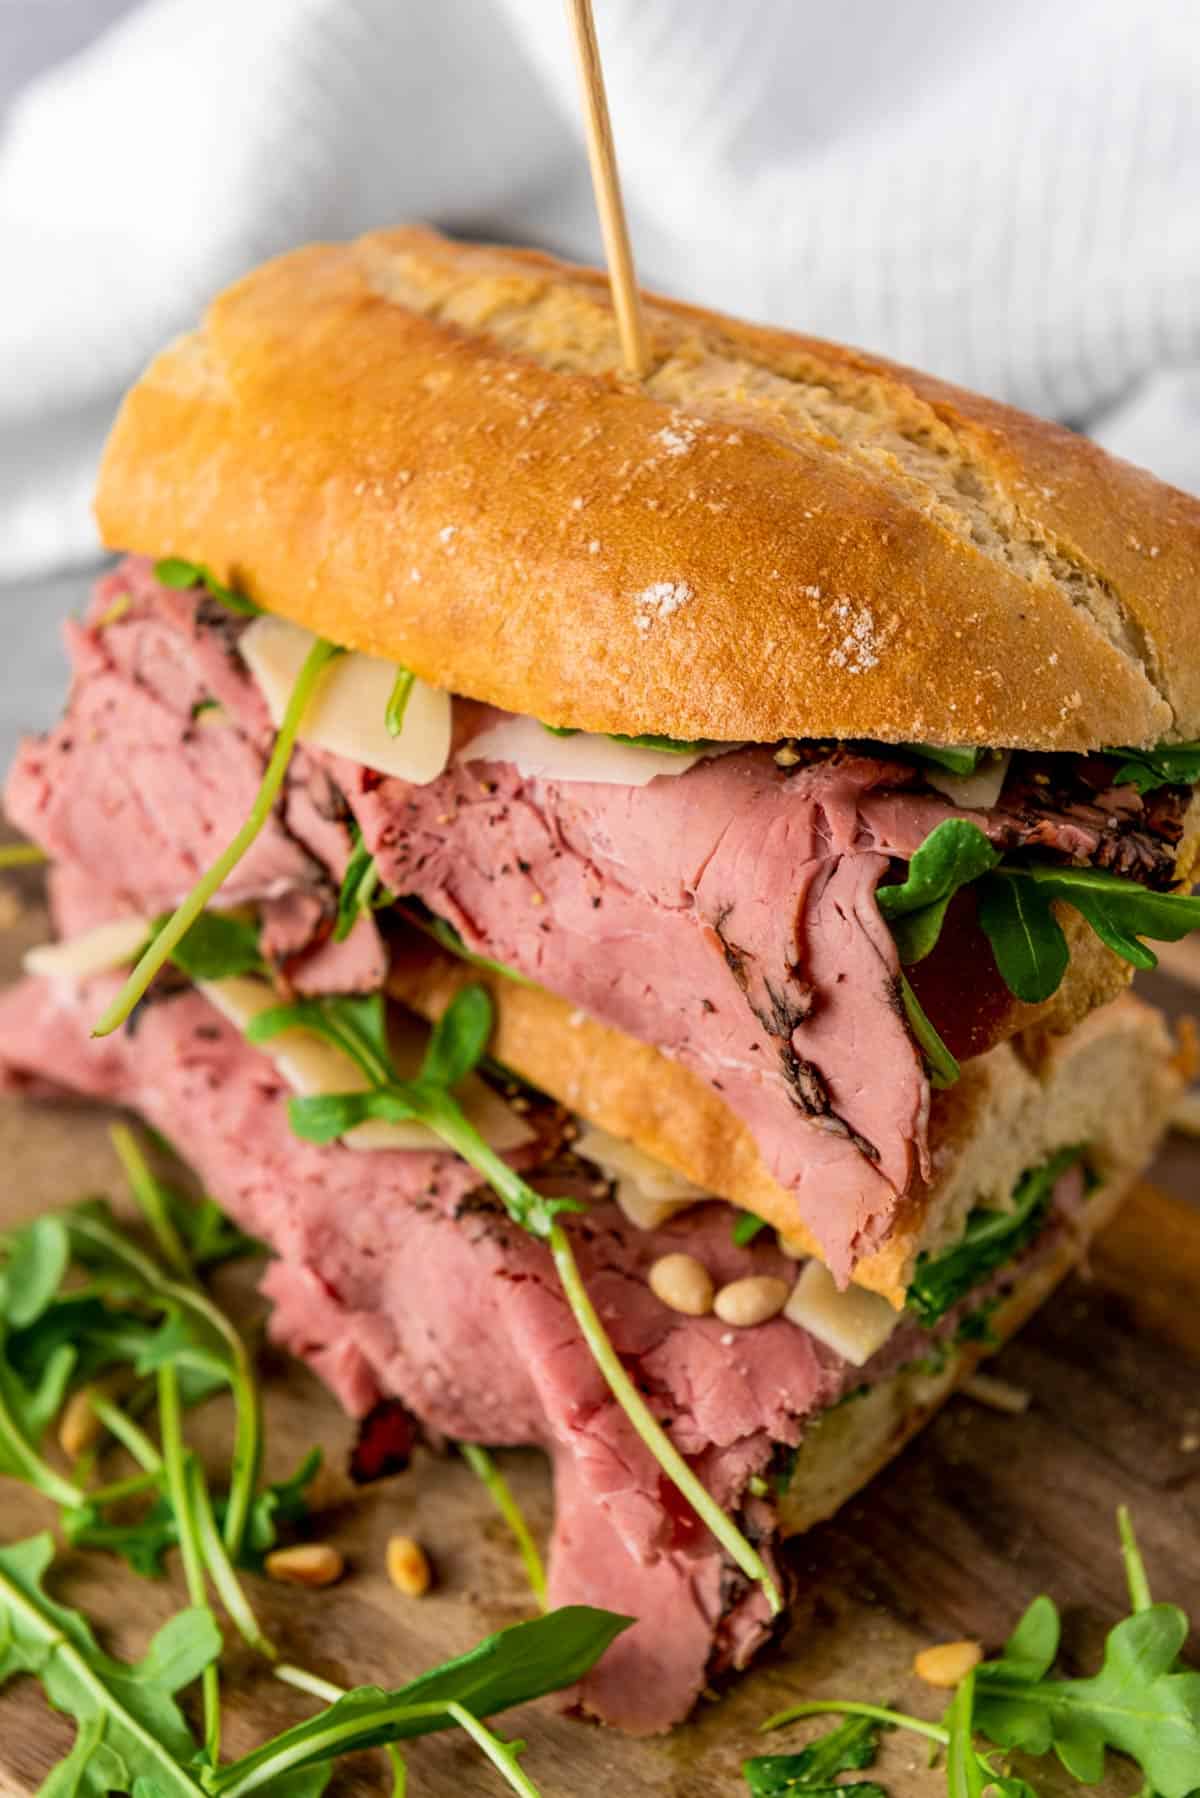 Deli Style Cold Roast Beef Sandwiches With Amazing Sauce